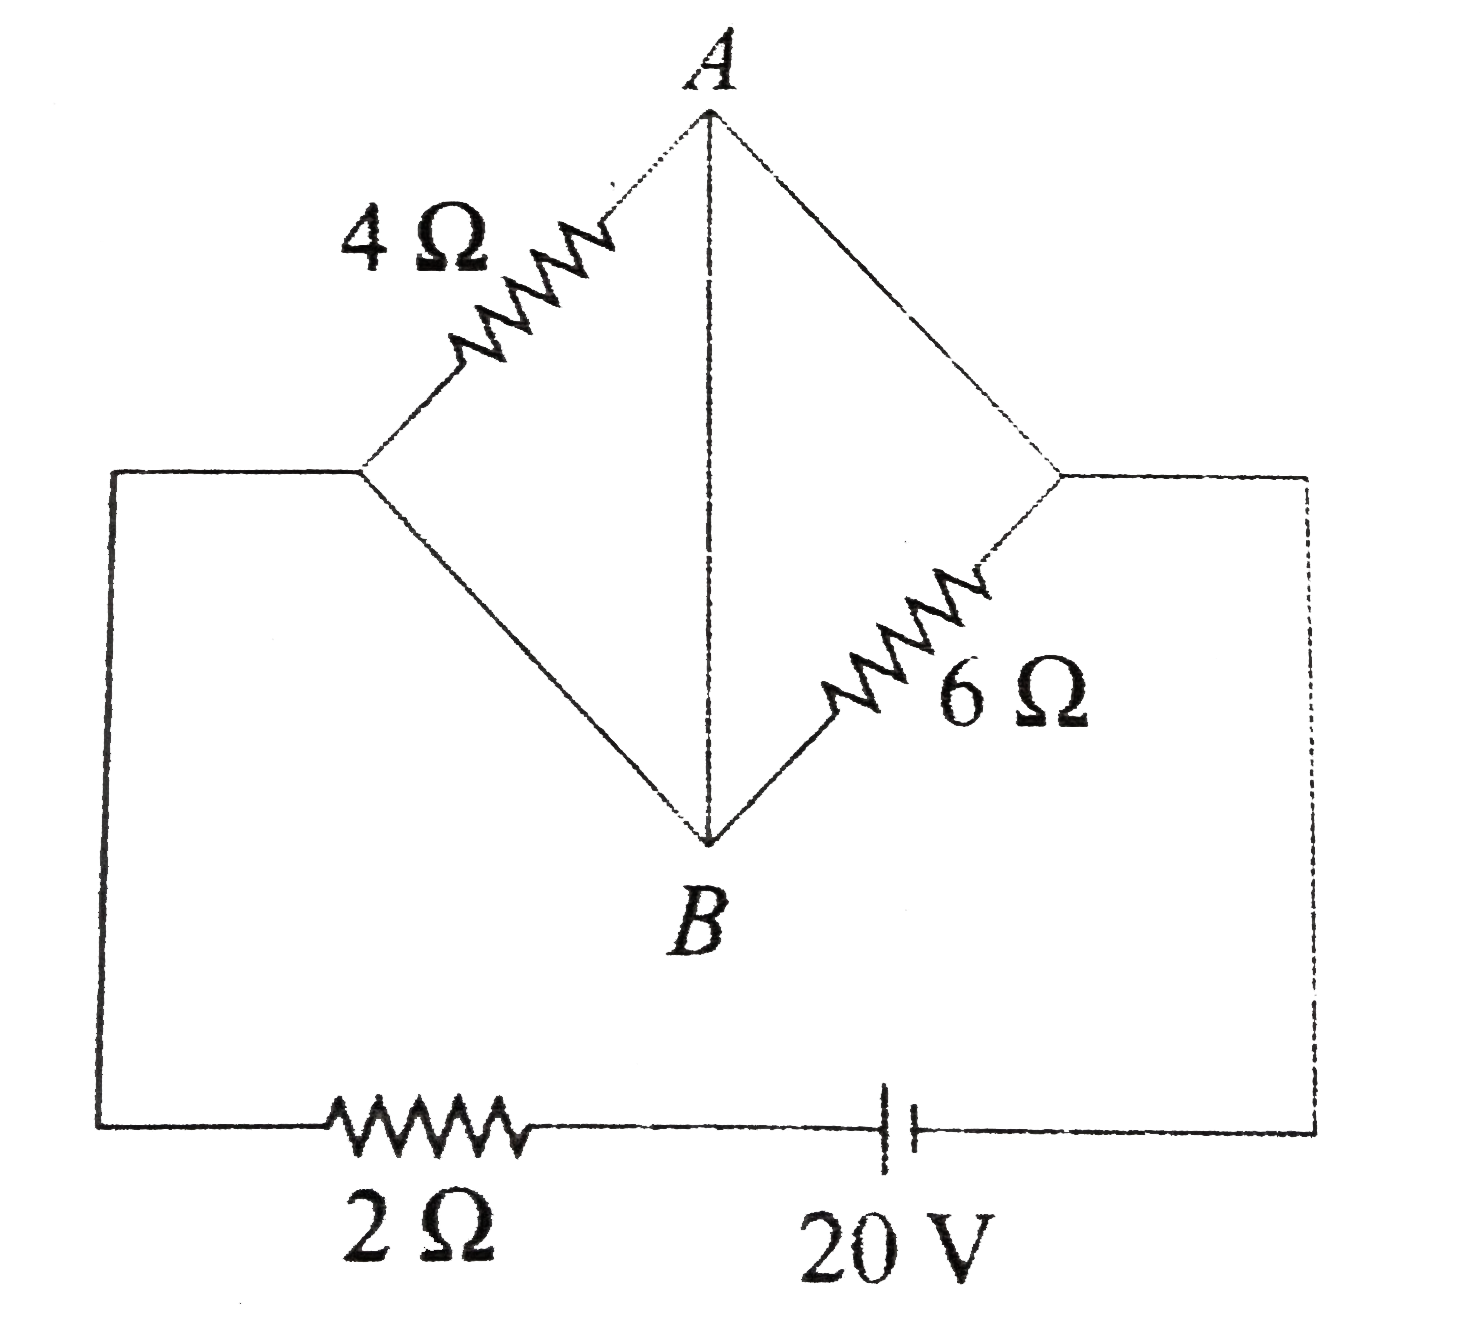 In the circuit shown in figure